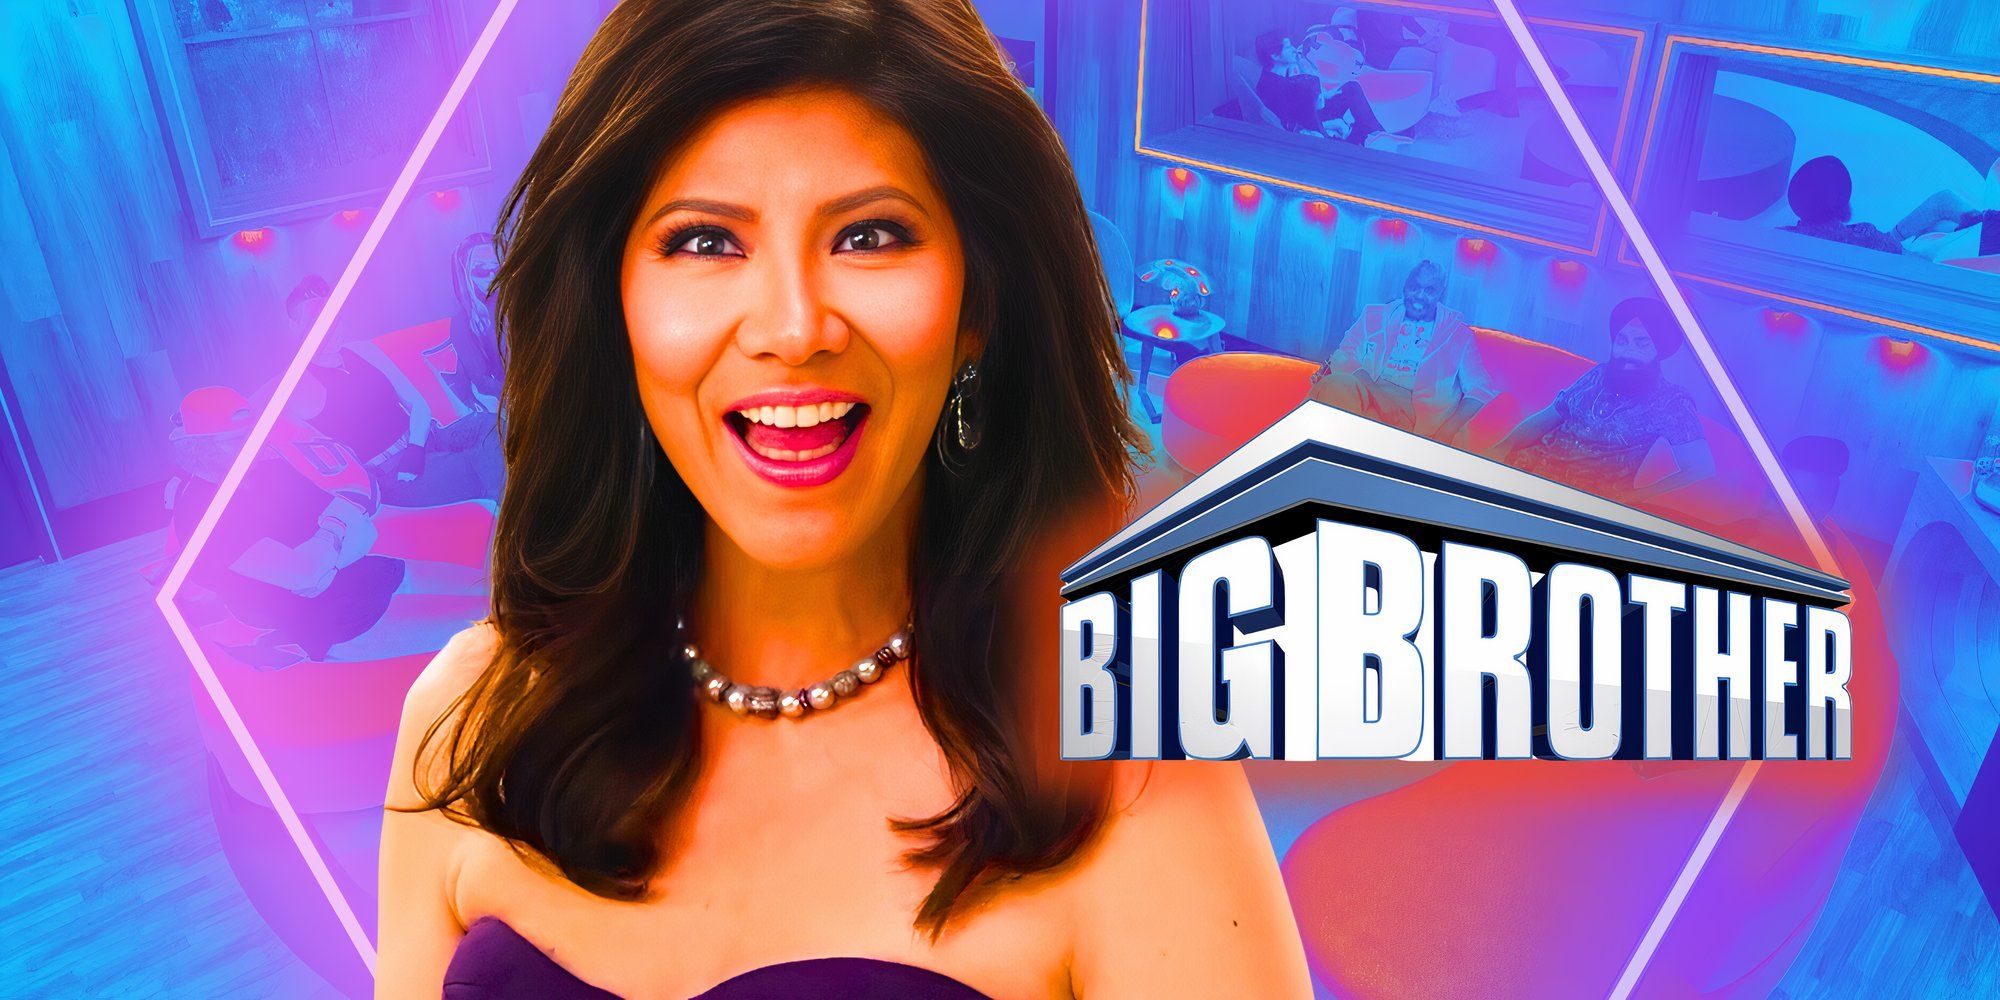 Big brother logo with Julie chen really happy